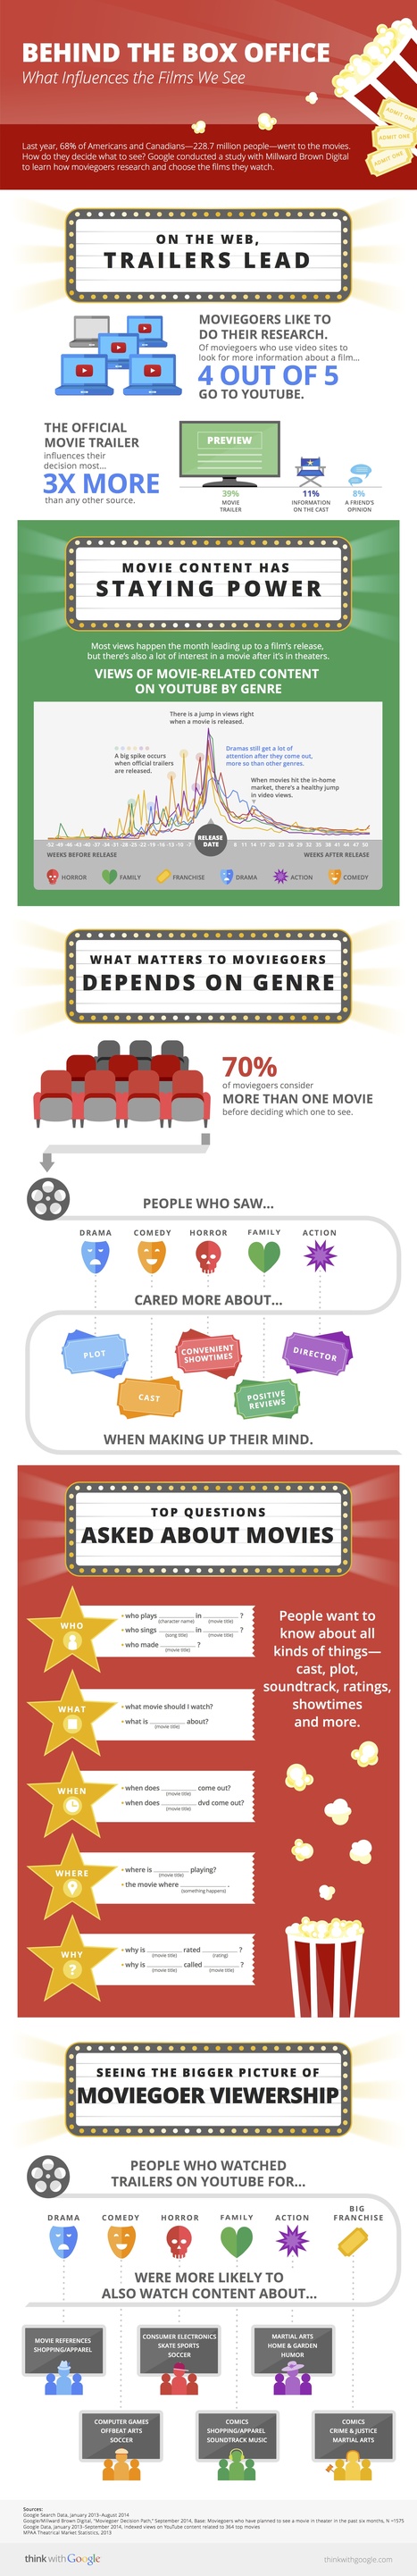 Infographic: How People Decide What Movies to See | Transmedia: Storytelling for the Digital Age | Scoop.it